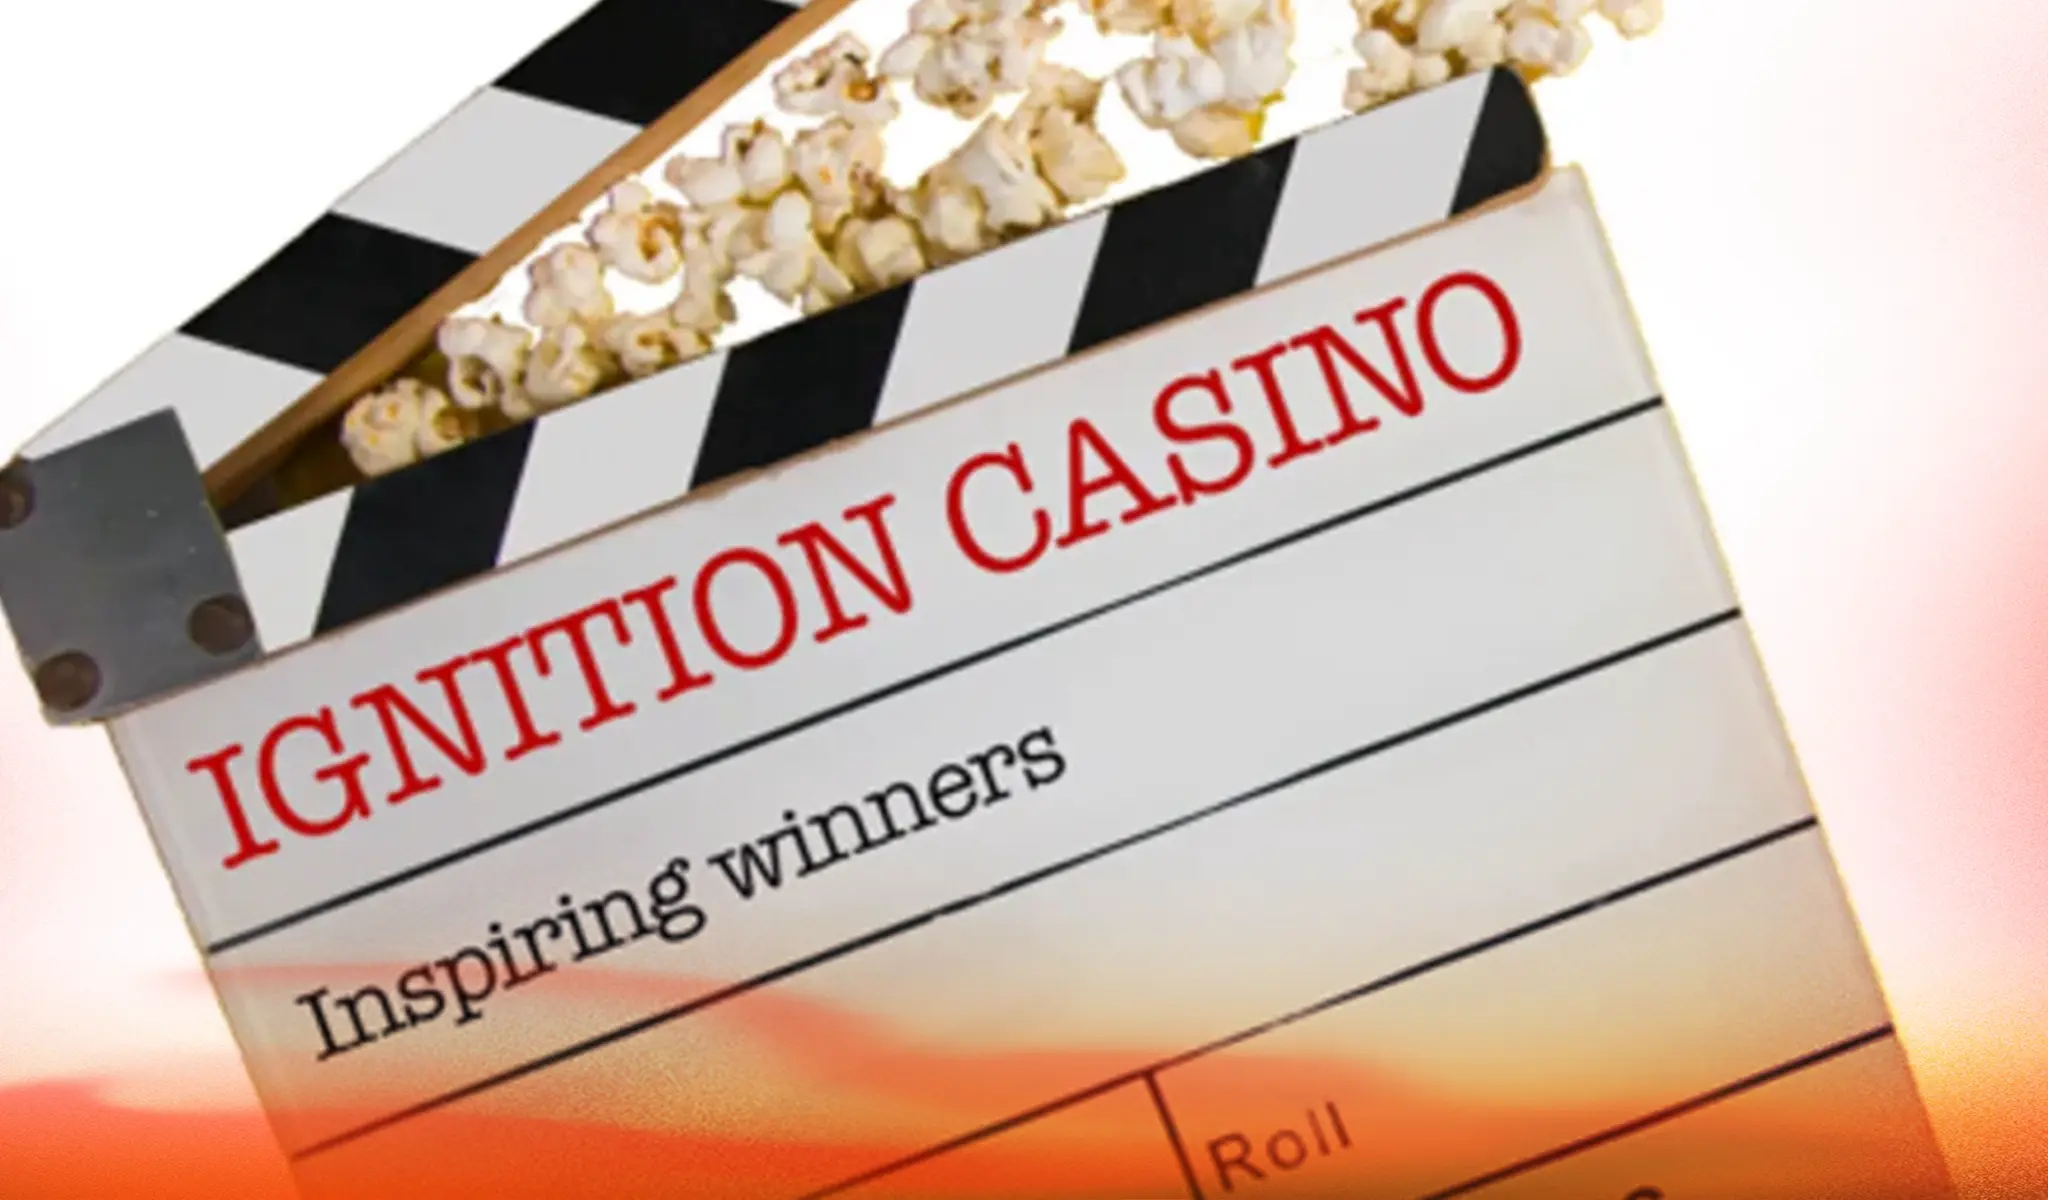 Clapperboard with "IGNITION CASINO" and popcorn on top, sunset backdrop.